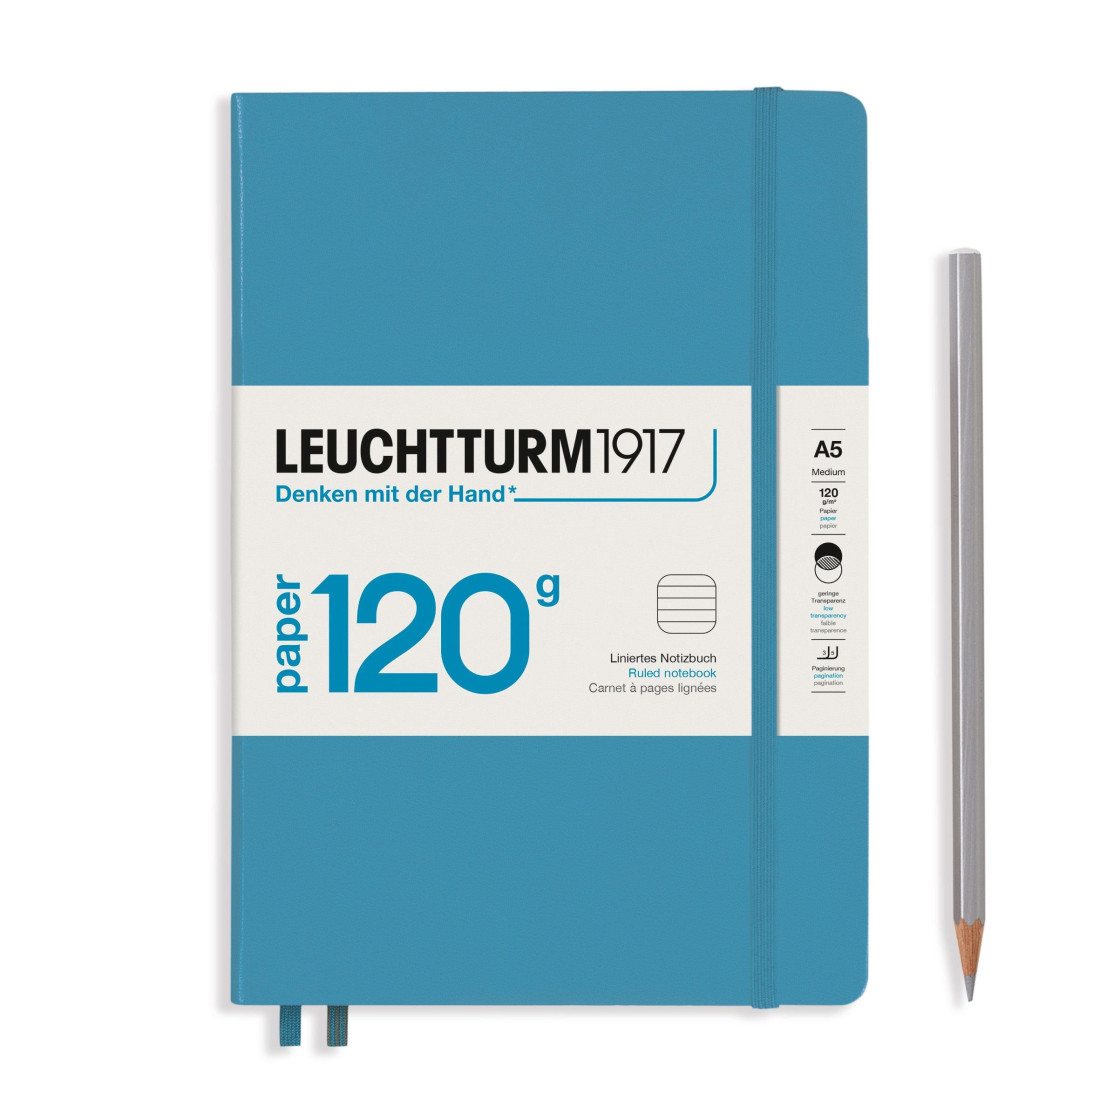 Leuchtturm 1917 Notebook A5 Edition 120g Nordic Blue Ruled Hard Cover